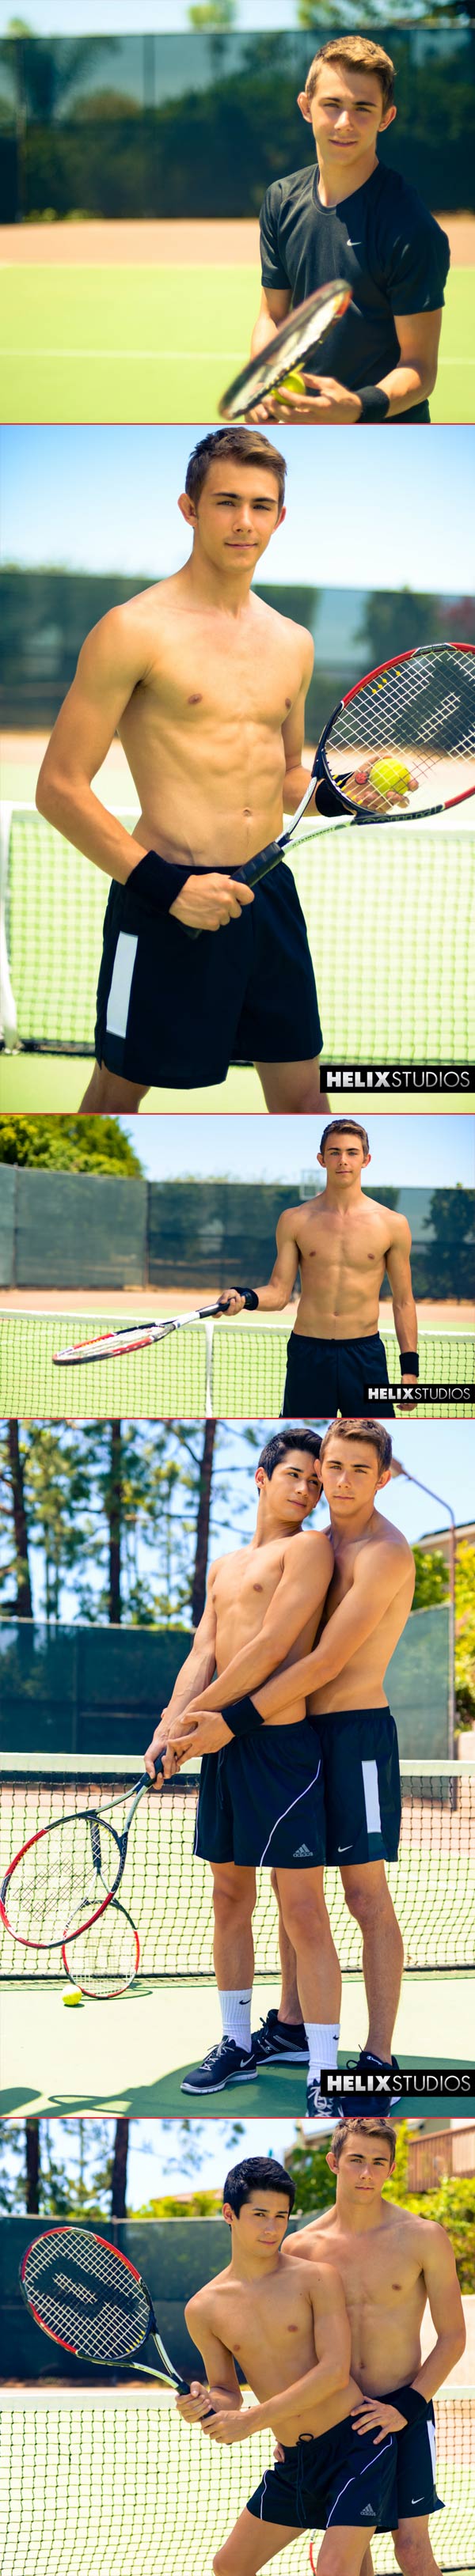 Man On Twink: The Tennis Instructor (Kody Knight & Liam Riley) at HelixStudios